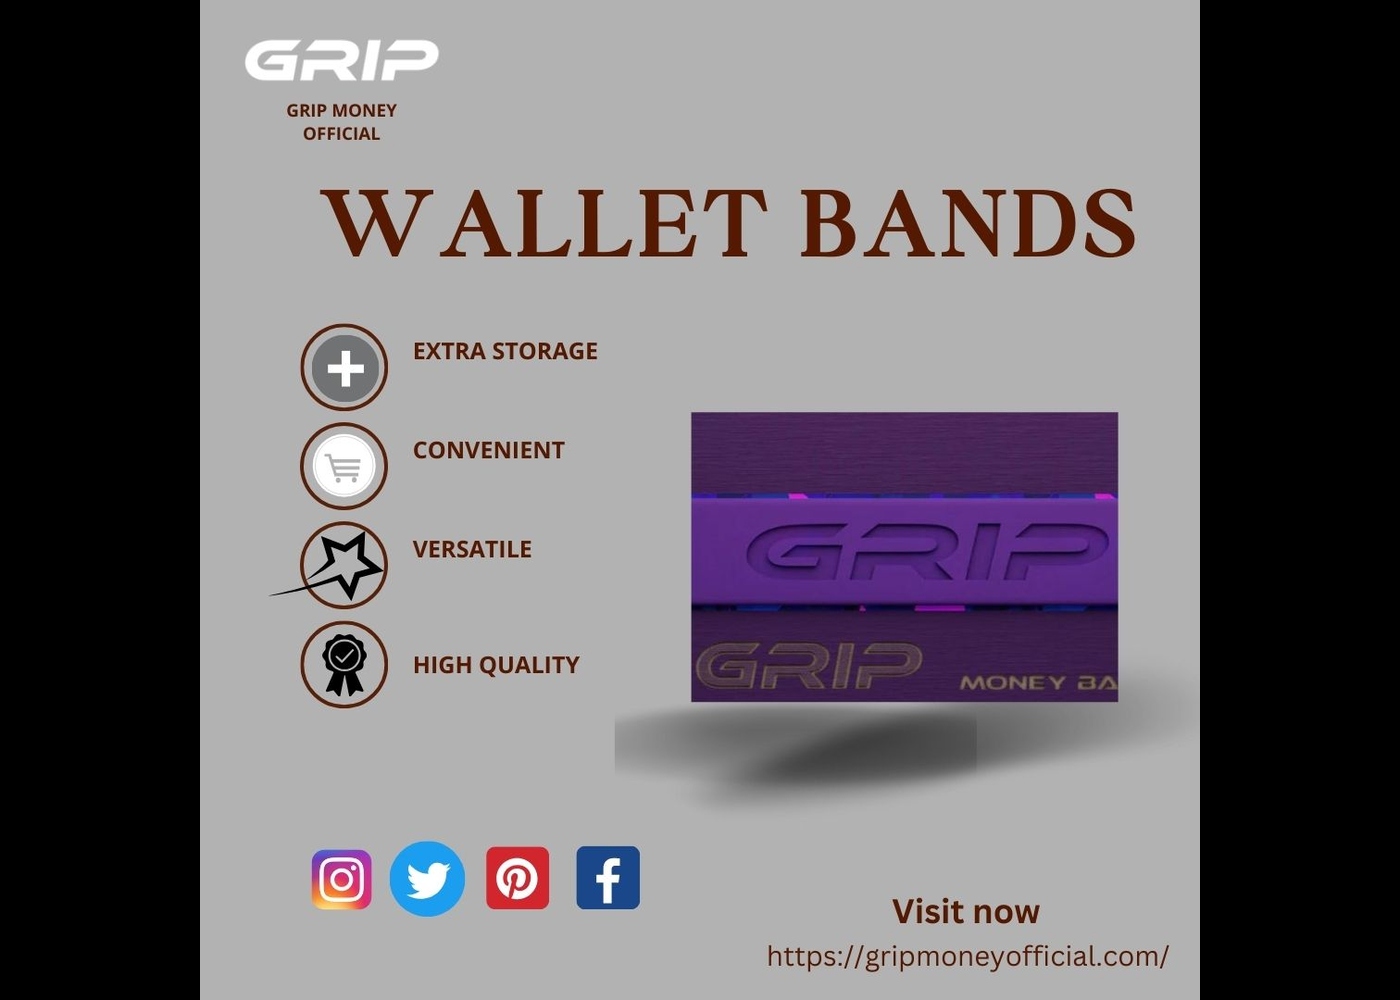 Buy Trading Wallet Bands To Keep Safe Your Accessories | Grip Money Official